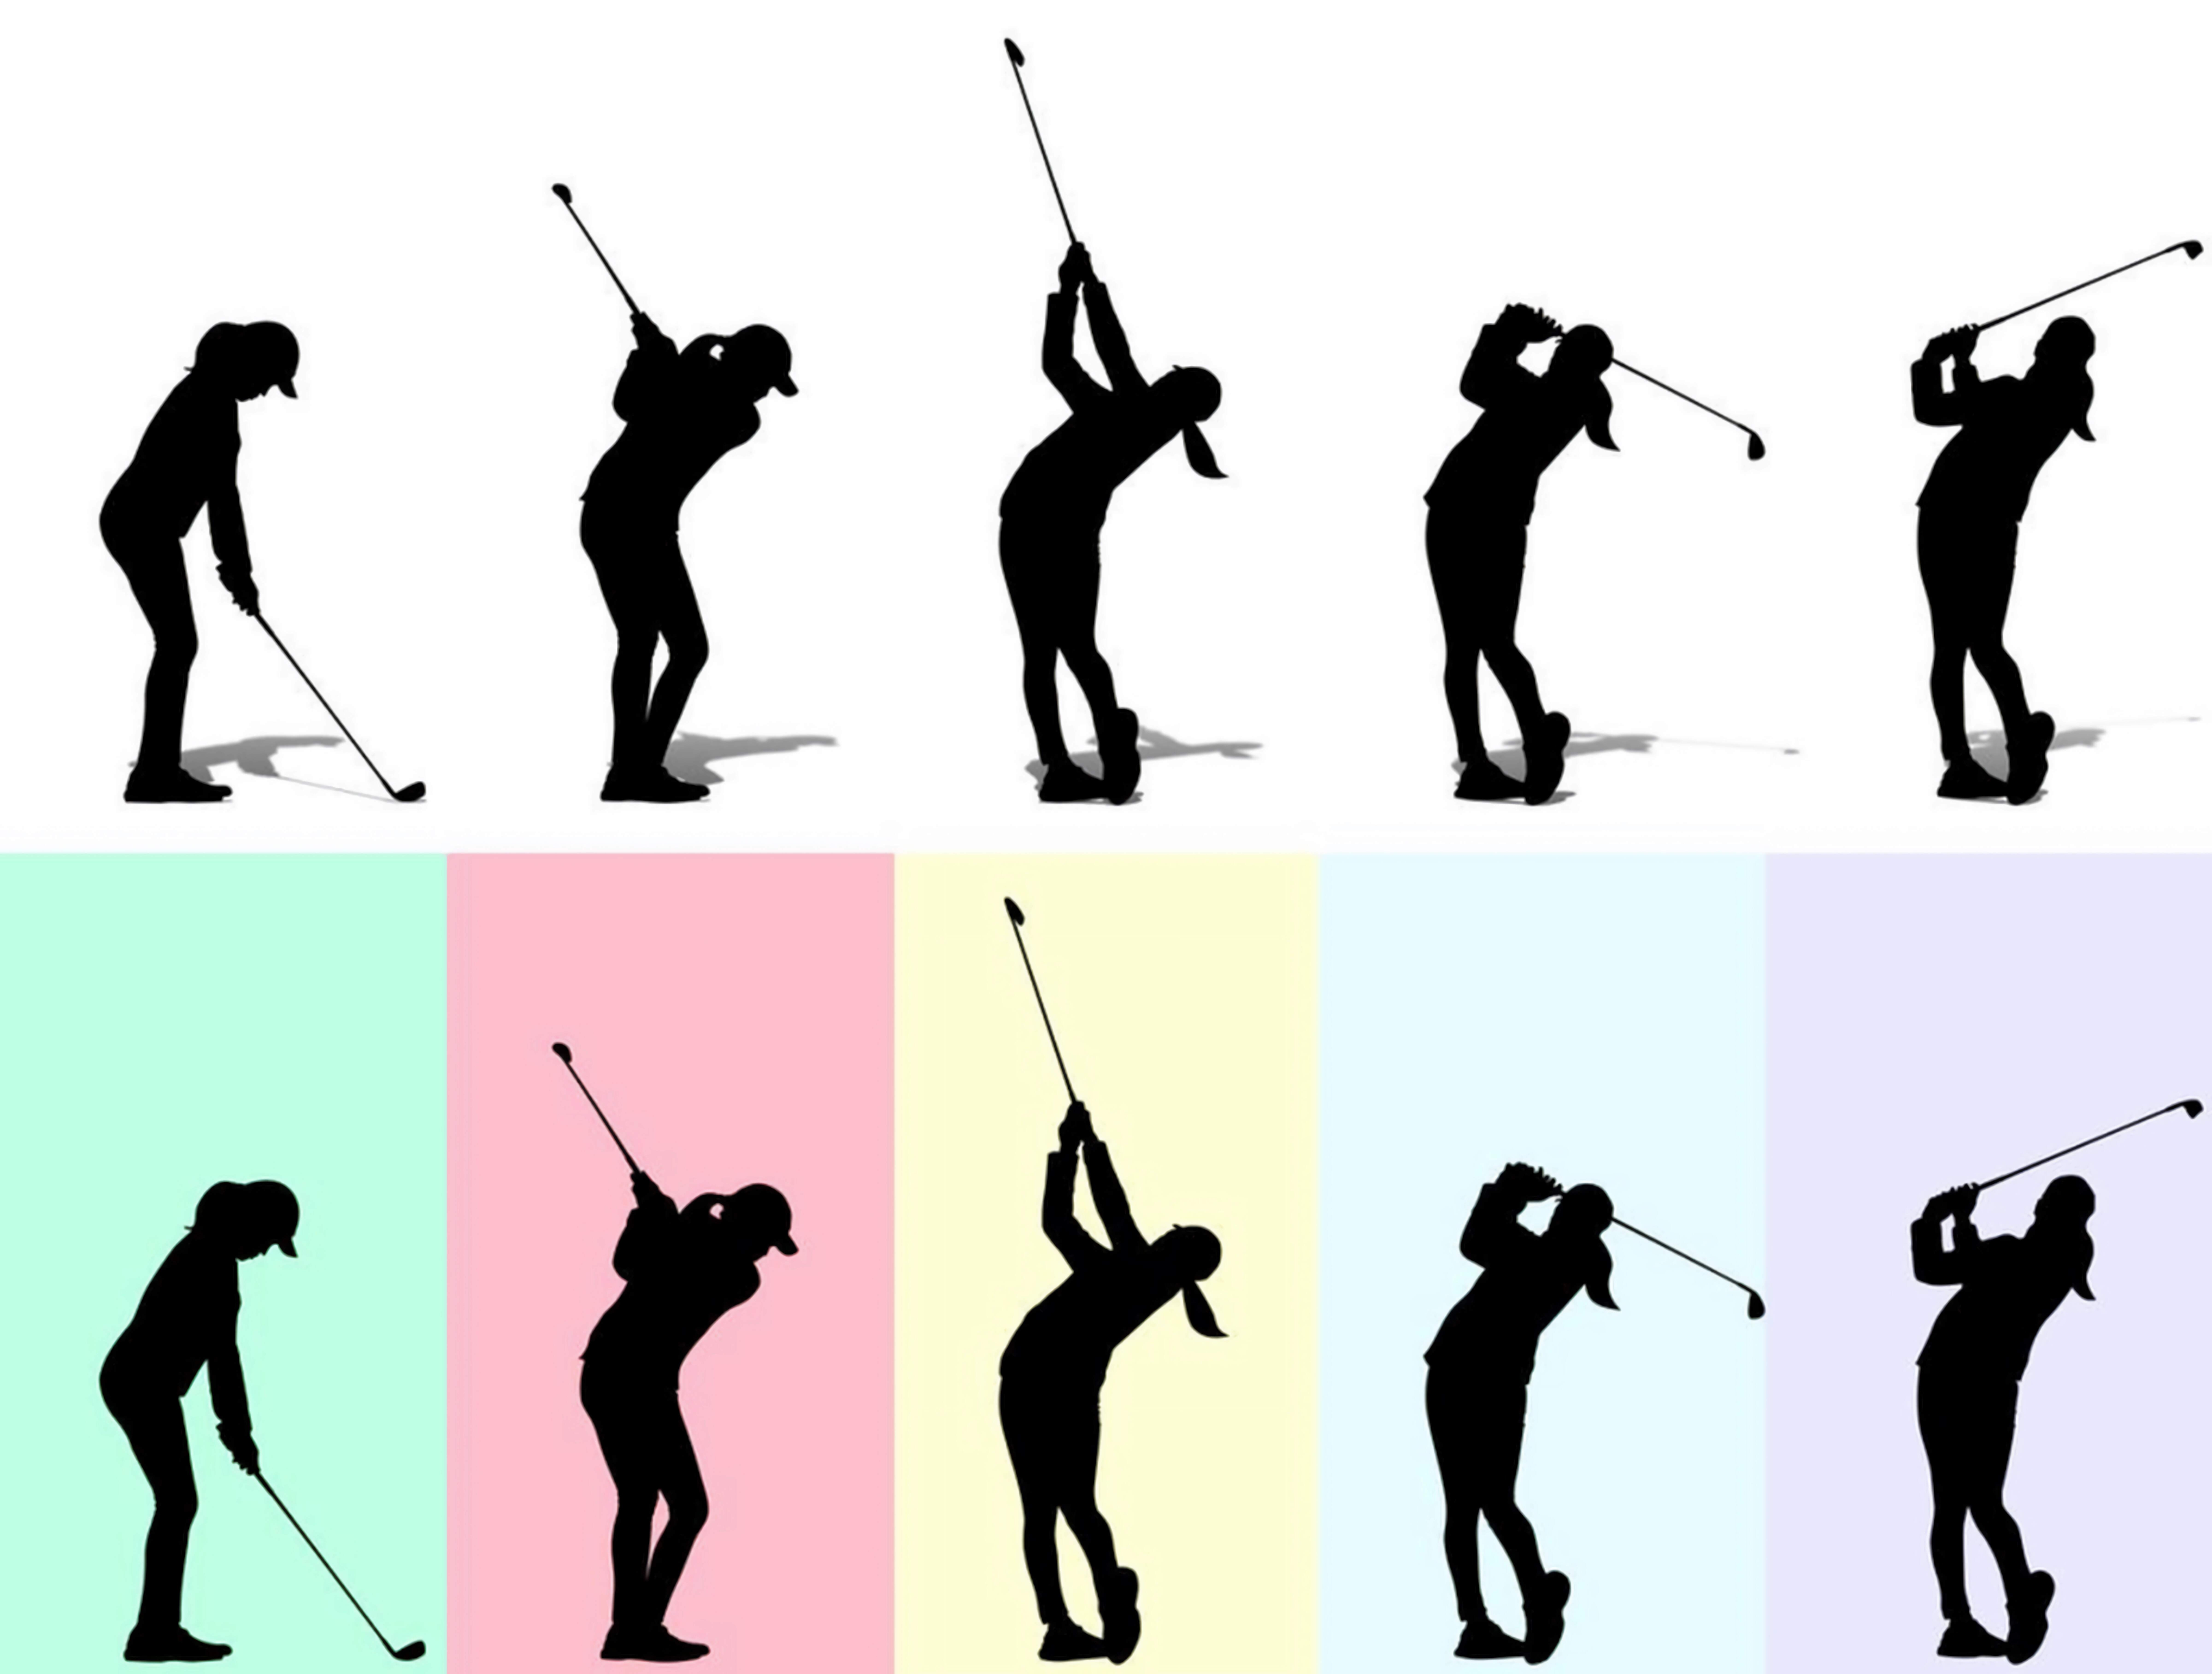 basic golf swing: Silhouette of a young golfer doing a from Set up to finish.